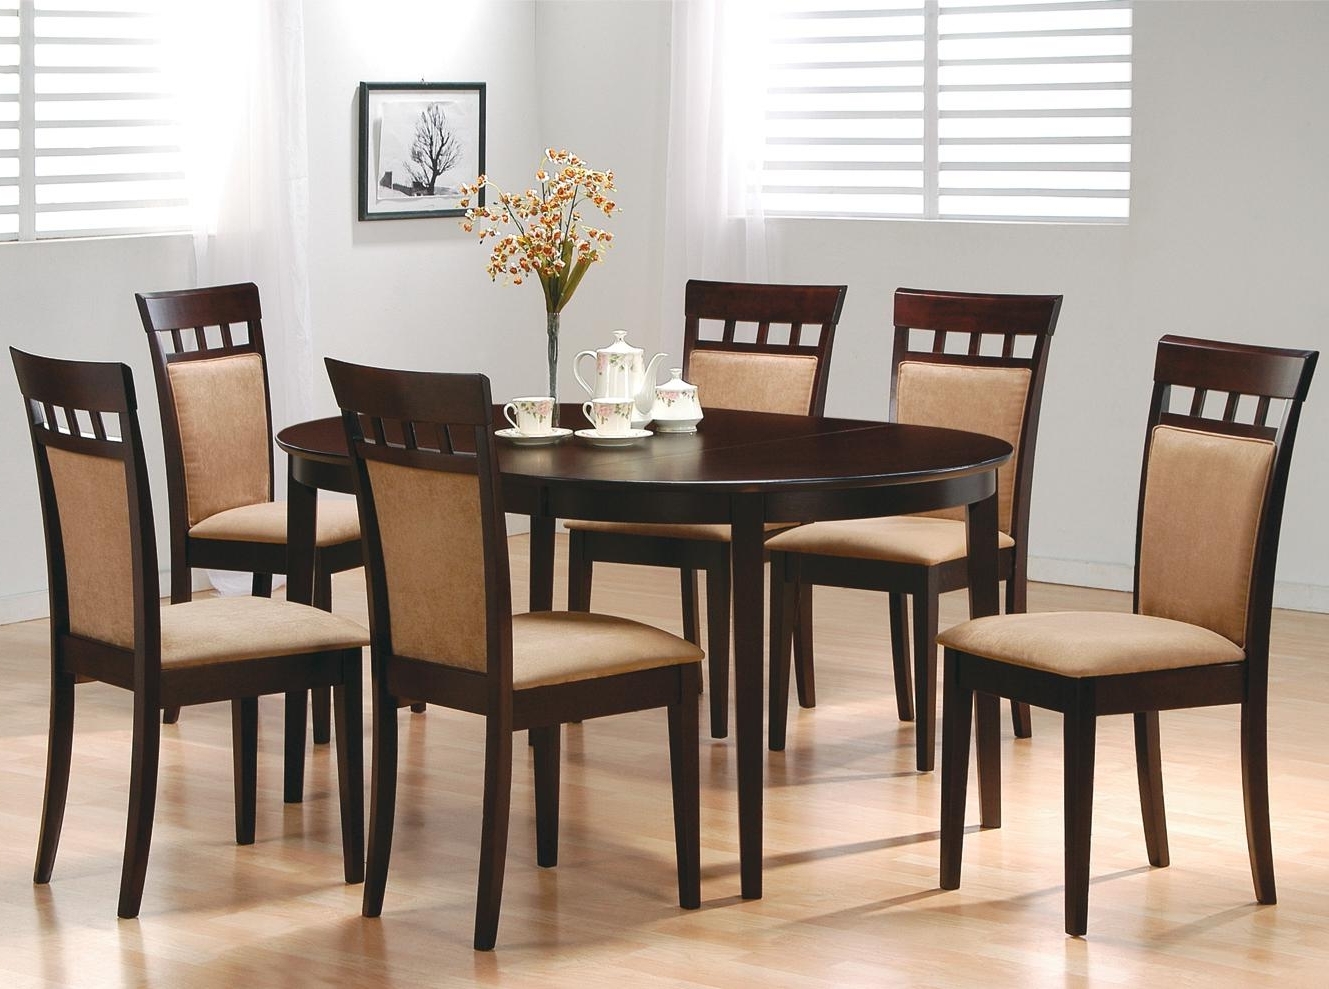 Dining Table with 6 Chairs | Dining Tables & Sets | Red Deer | Kijiji